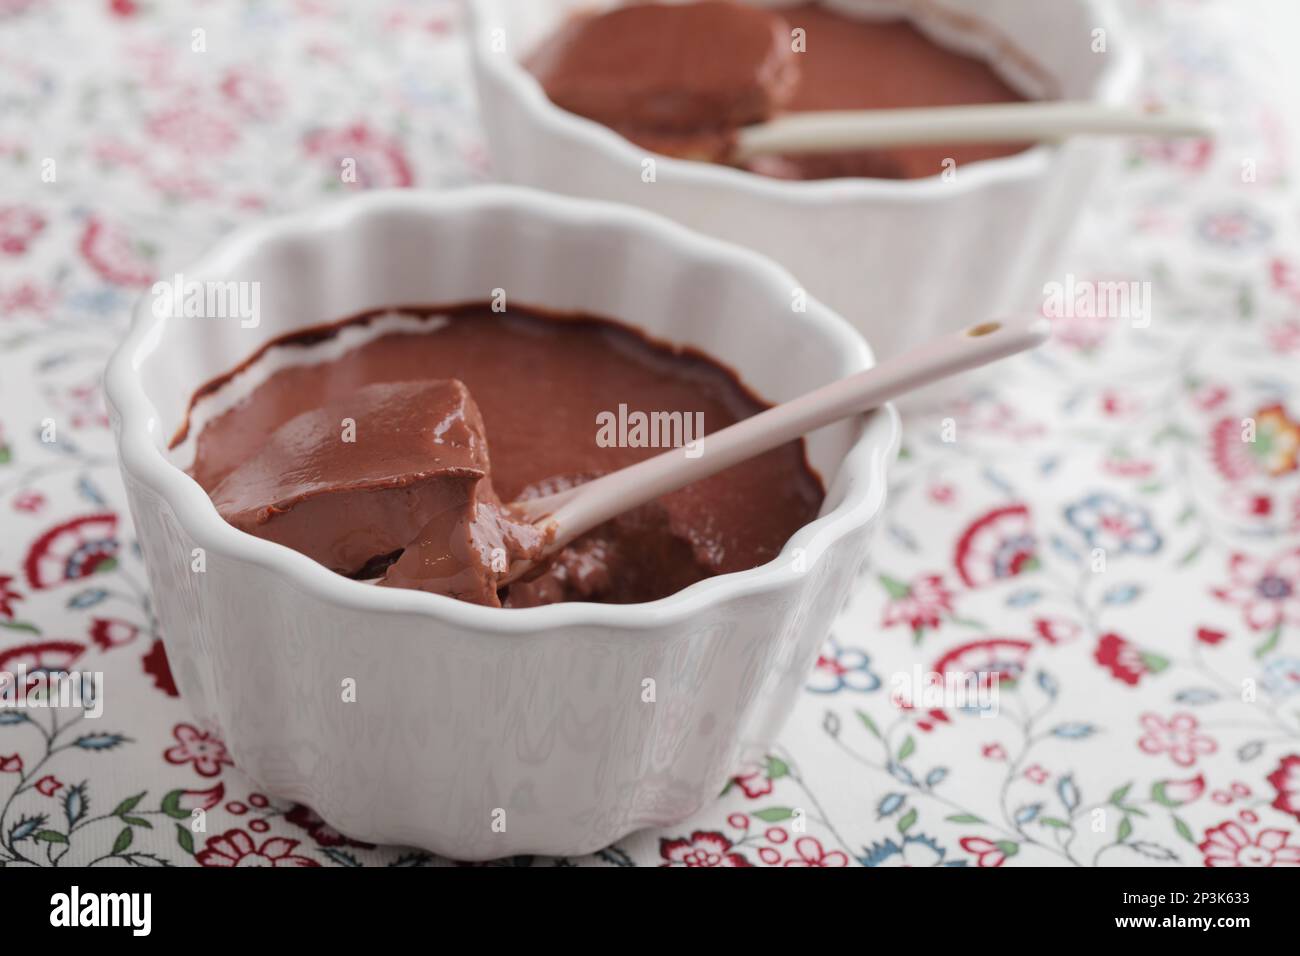 Macro shot of chocolate pudding served in baking dishes Stock Photo